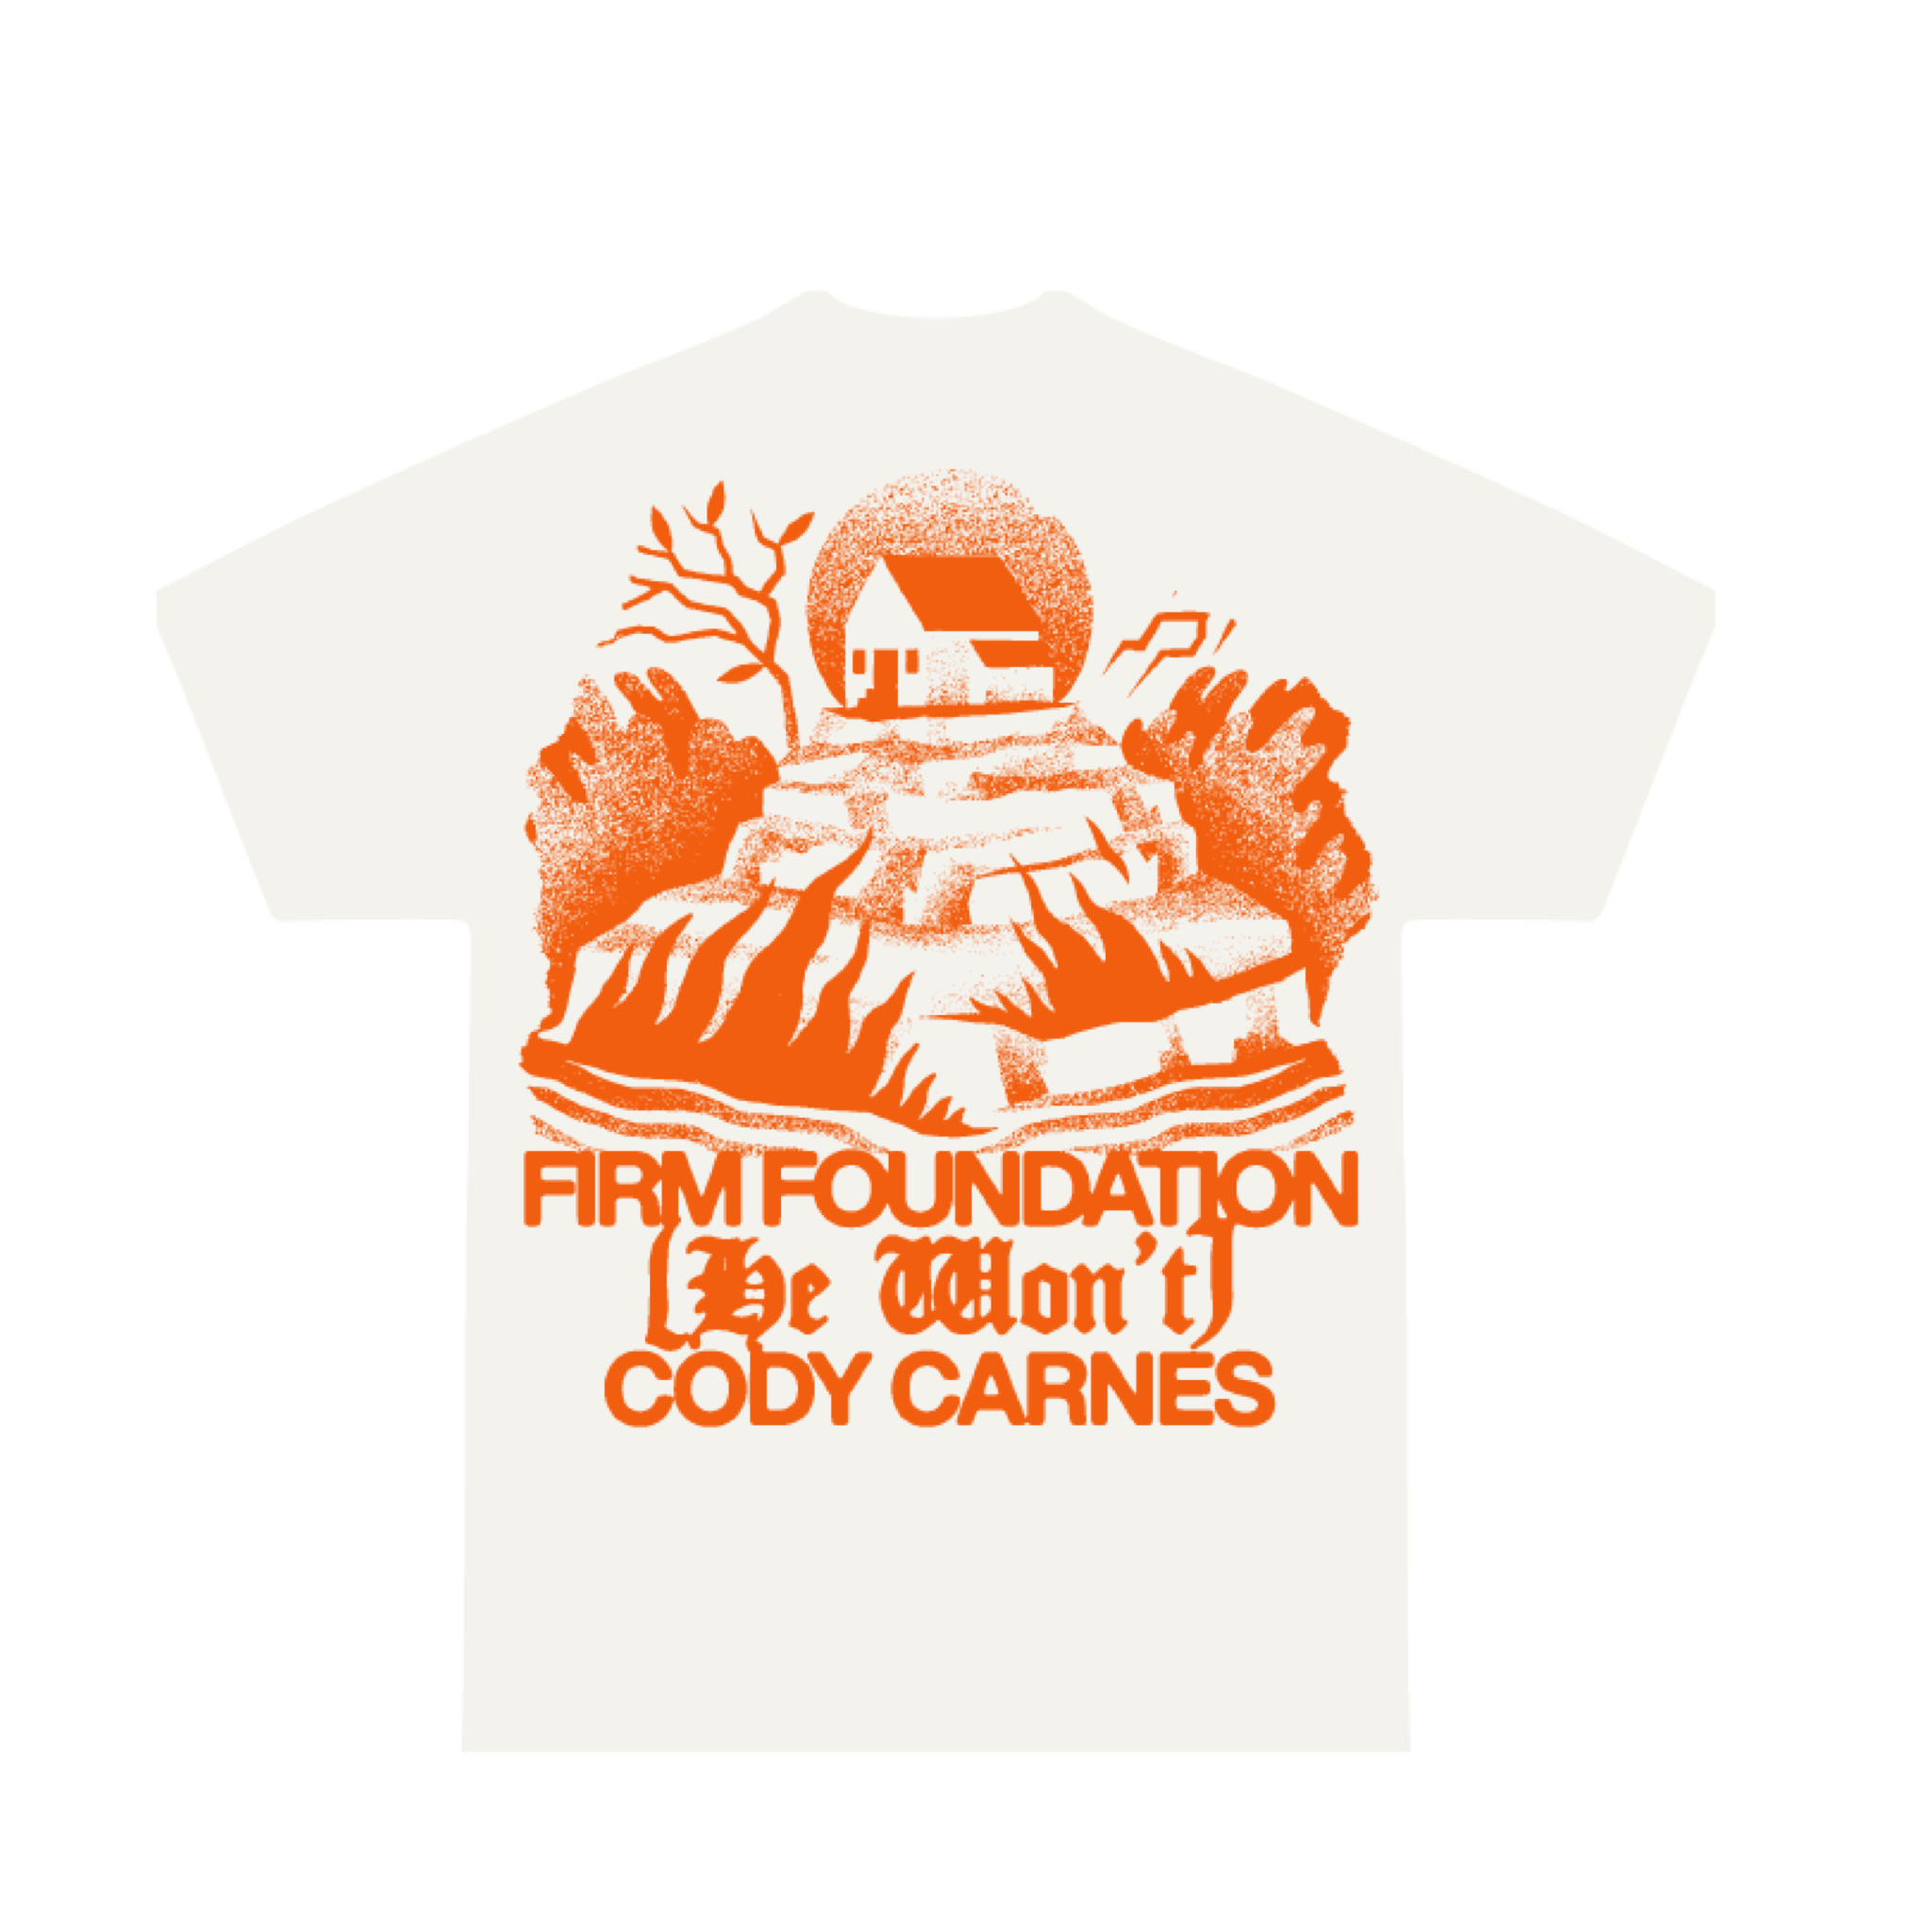 FIRM FOUNDATION - UNISEX SHIRT – Cody Carnes Official Store